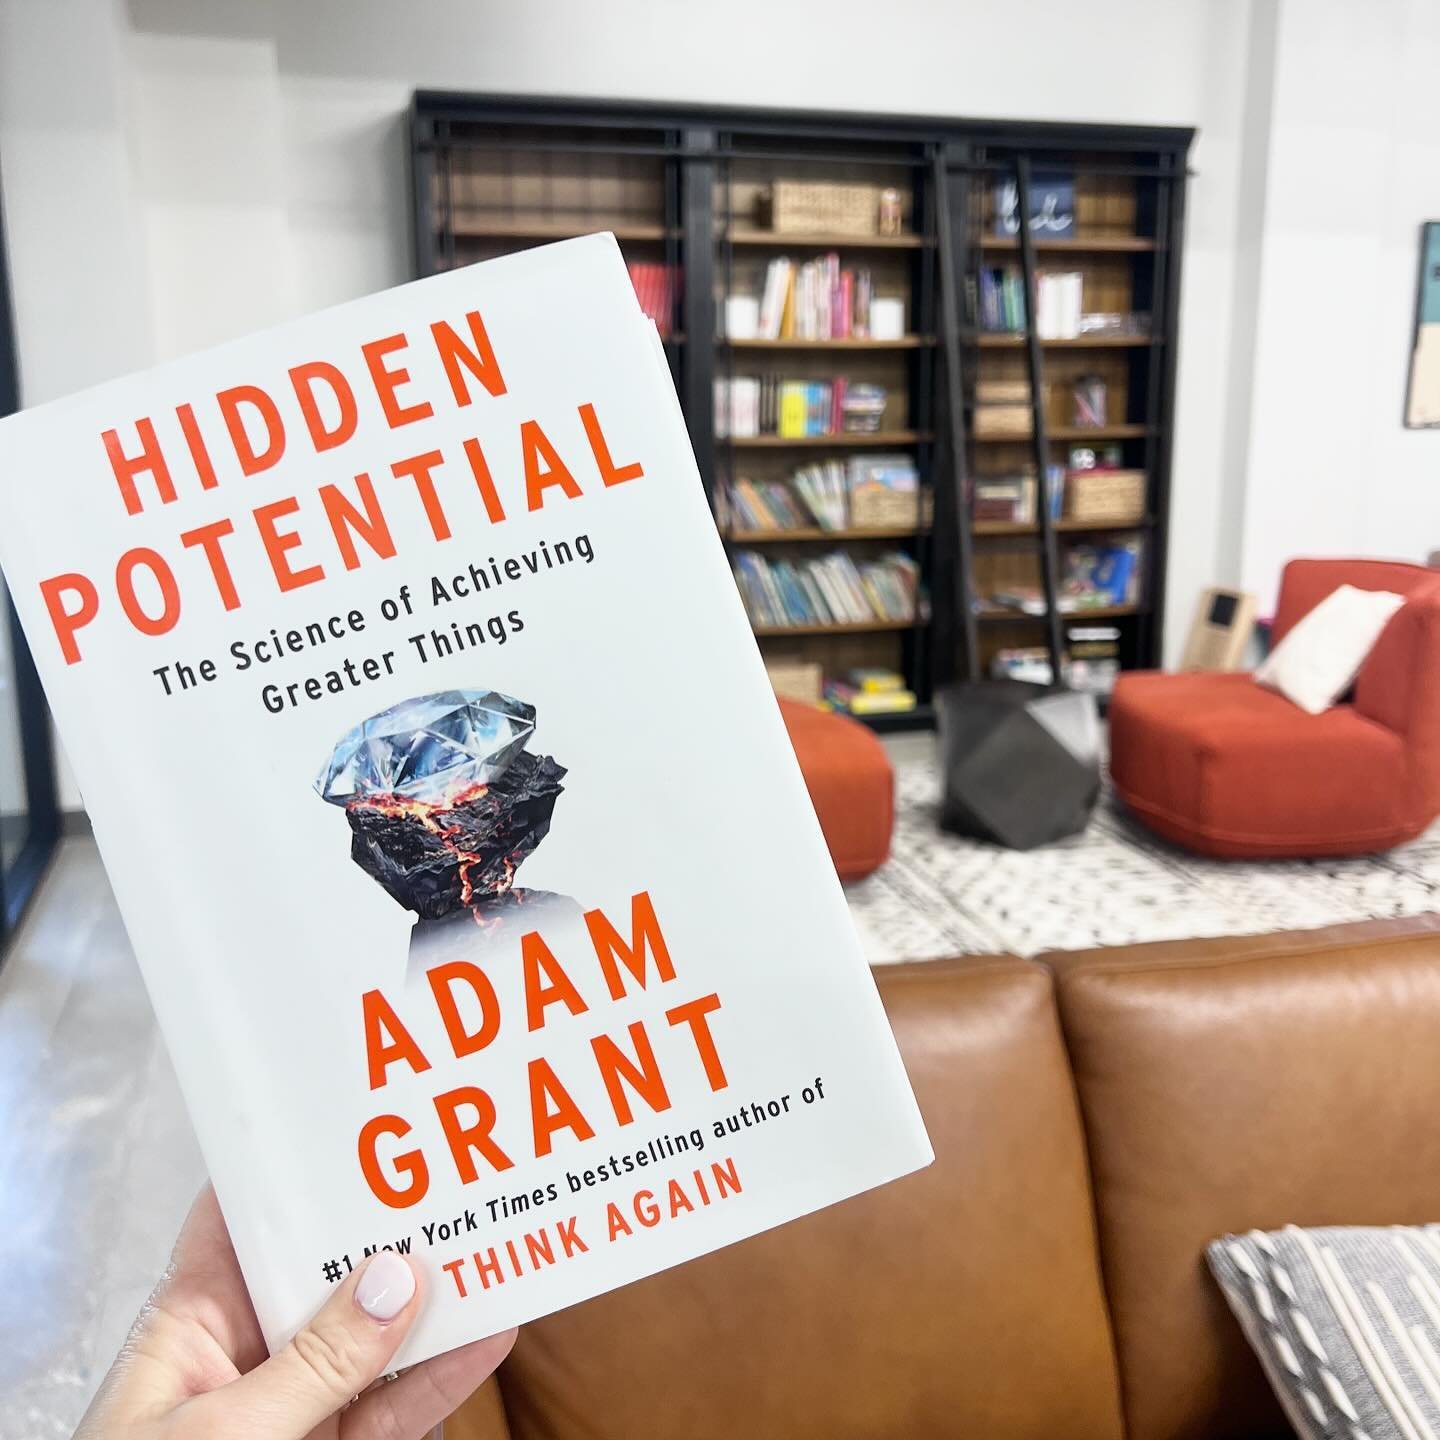 It&rsquo;s World Book Day &amp; couldn&rsquo;t be more fitting that our alum are meeting for the third round of our Hidden Potential book club! We&rsquo;re big fans of @adamgrant and his latest book does not disappoint. 

One of the biggest learnings